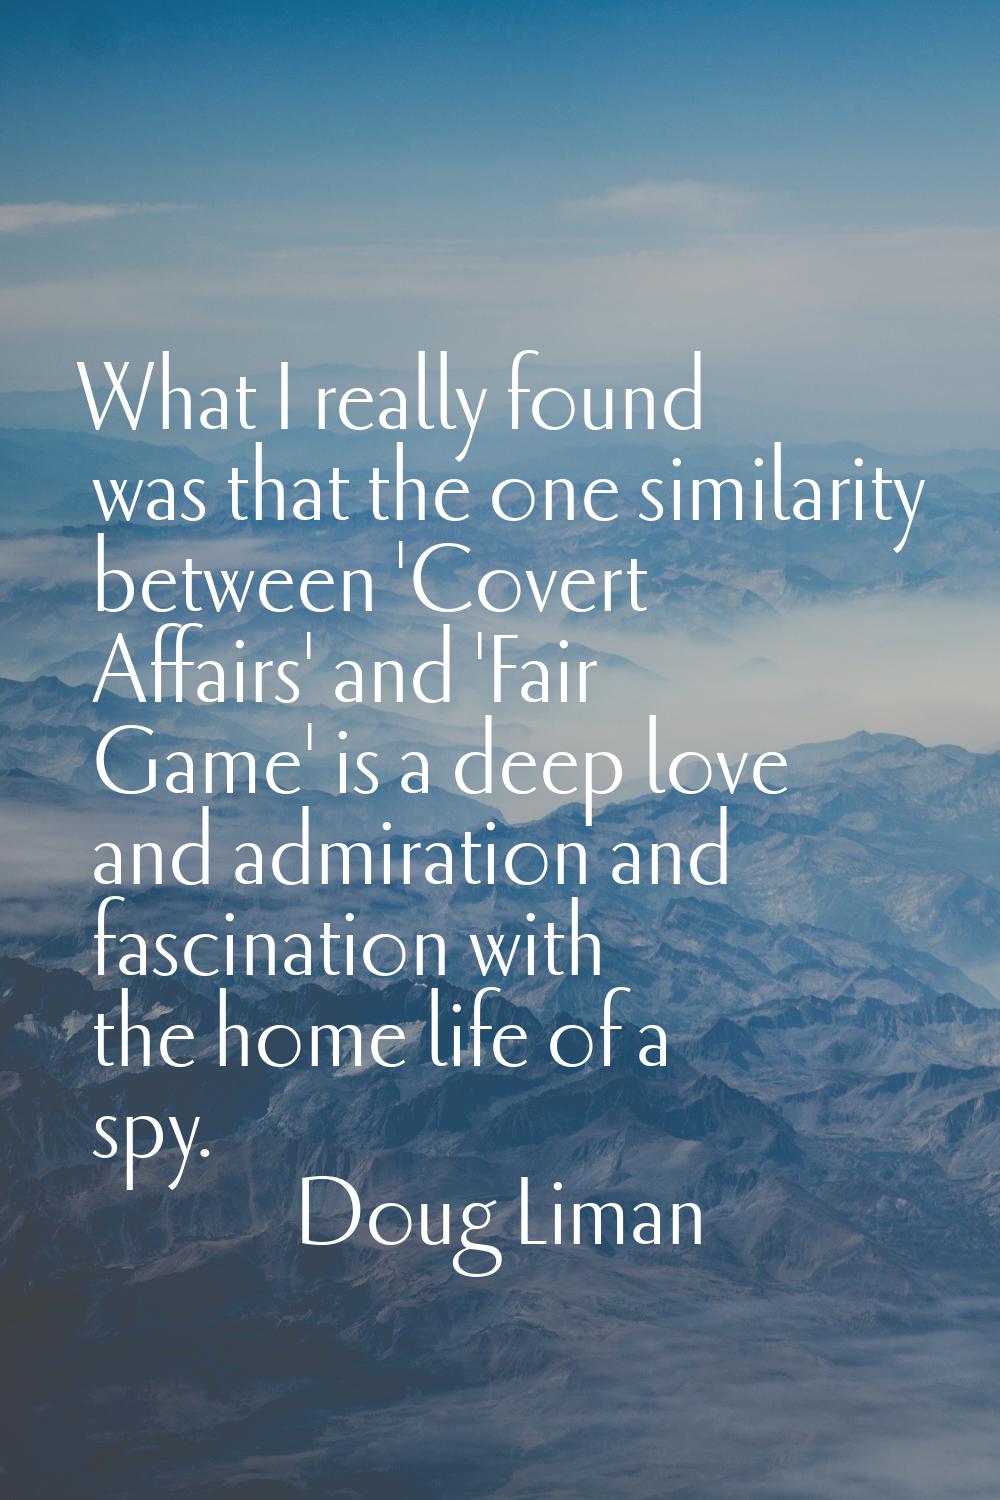 What I really found was that the one similarity between 'Covert Affairs' and 'Fair Game' is a deep 